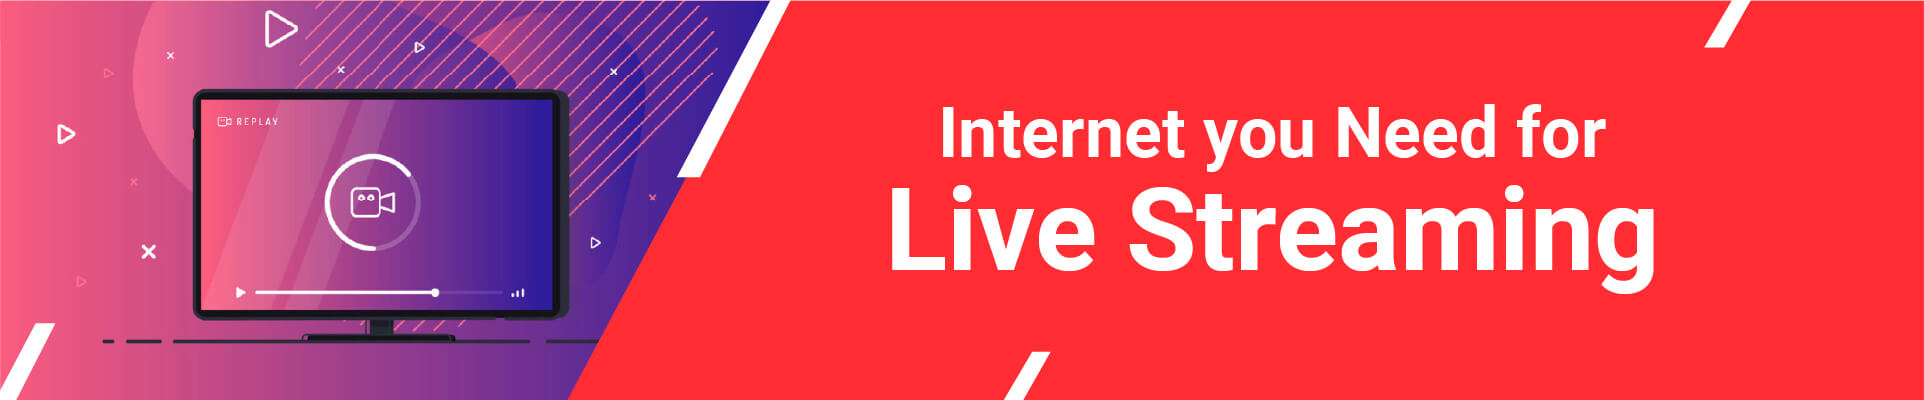 What Internet Speed You Need For Live Streaming?